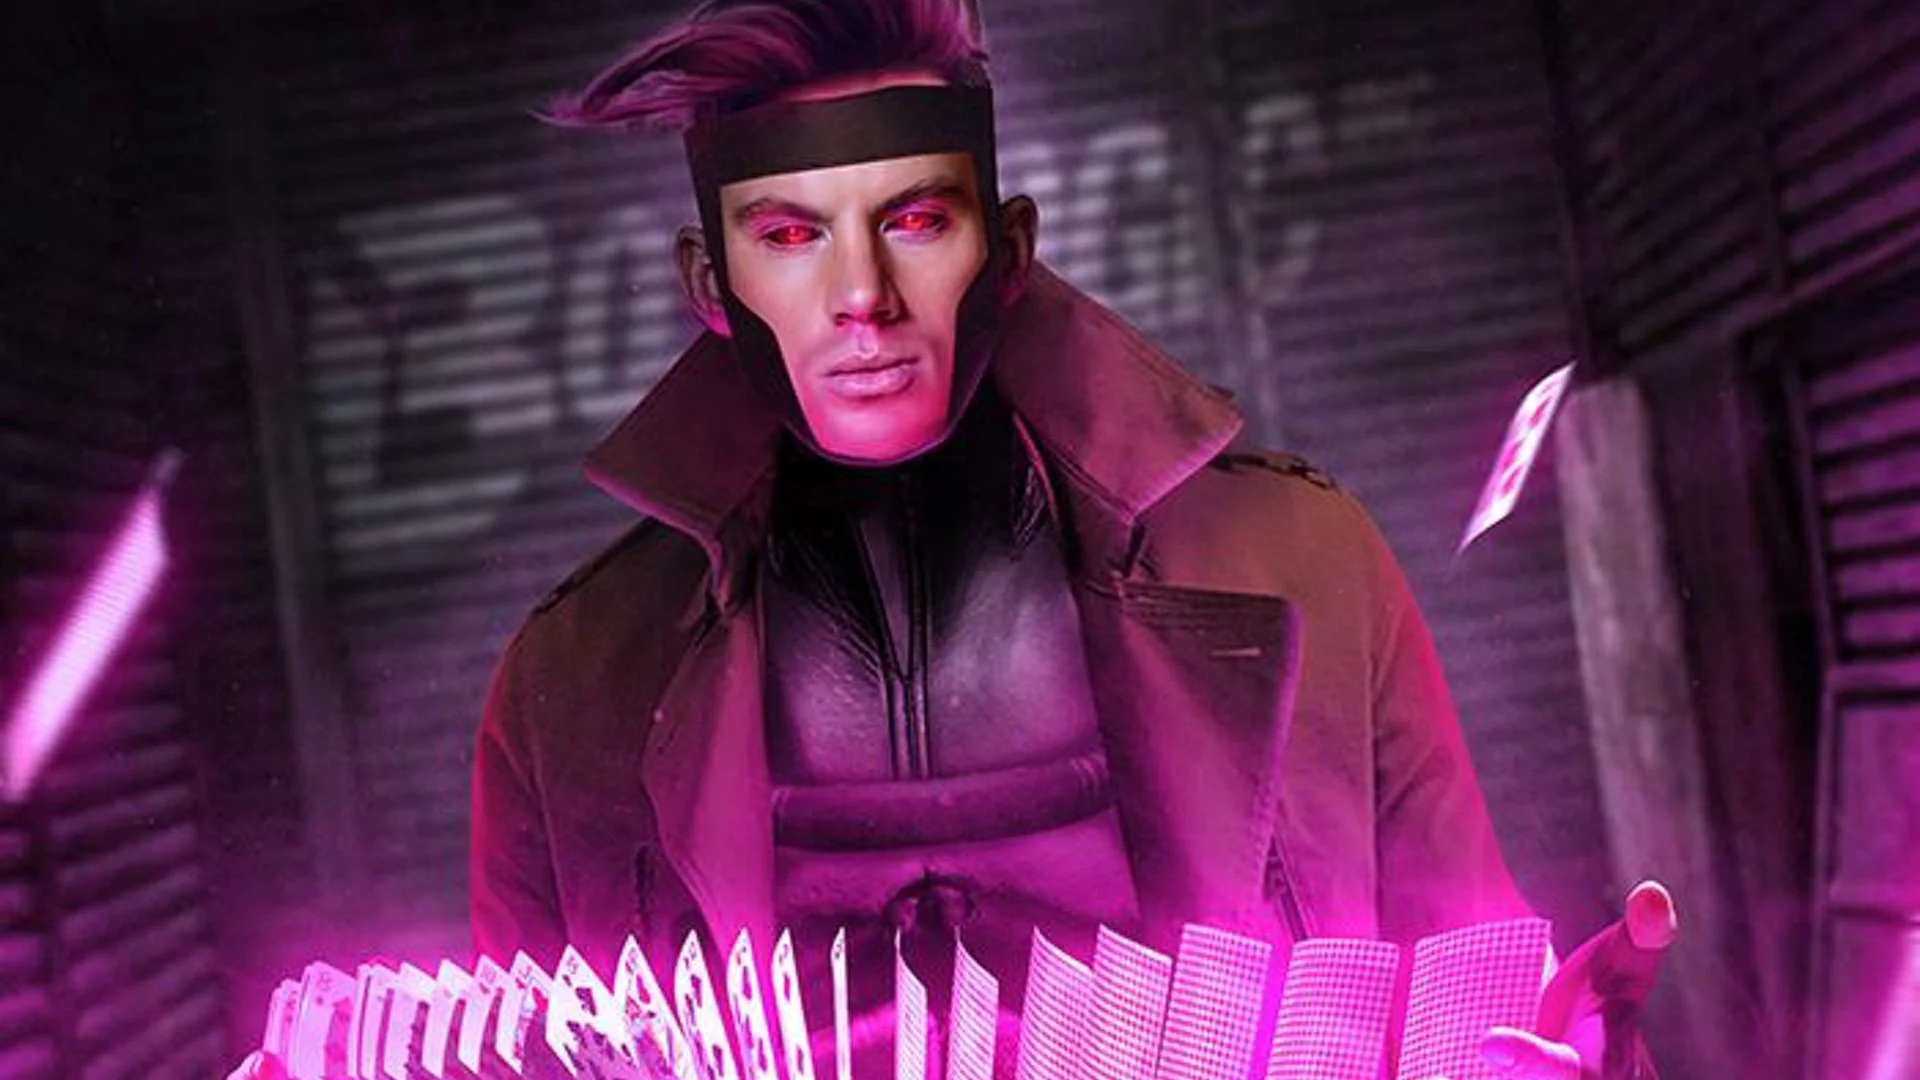 Channing Tatum As Gambit In ‘Deadpool 3’: Read To Know More